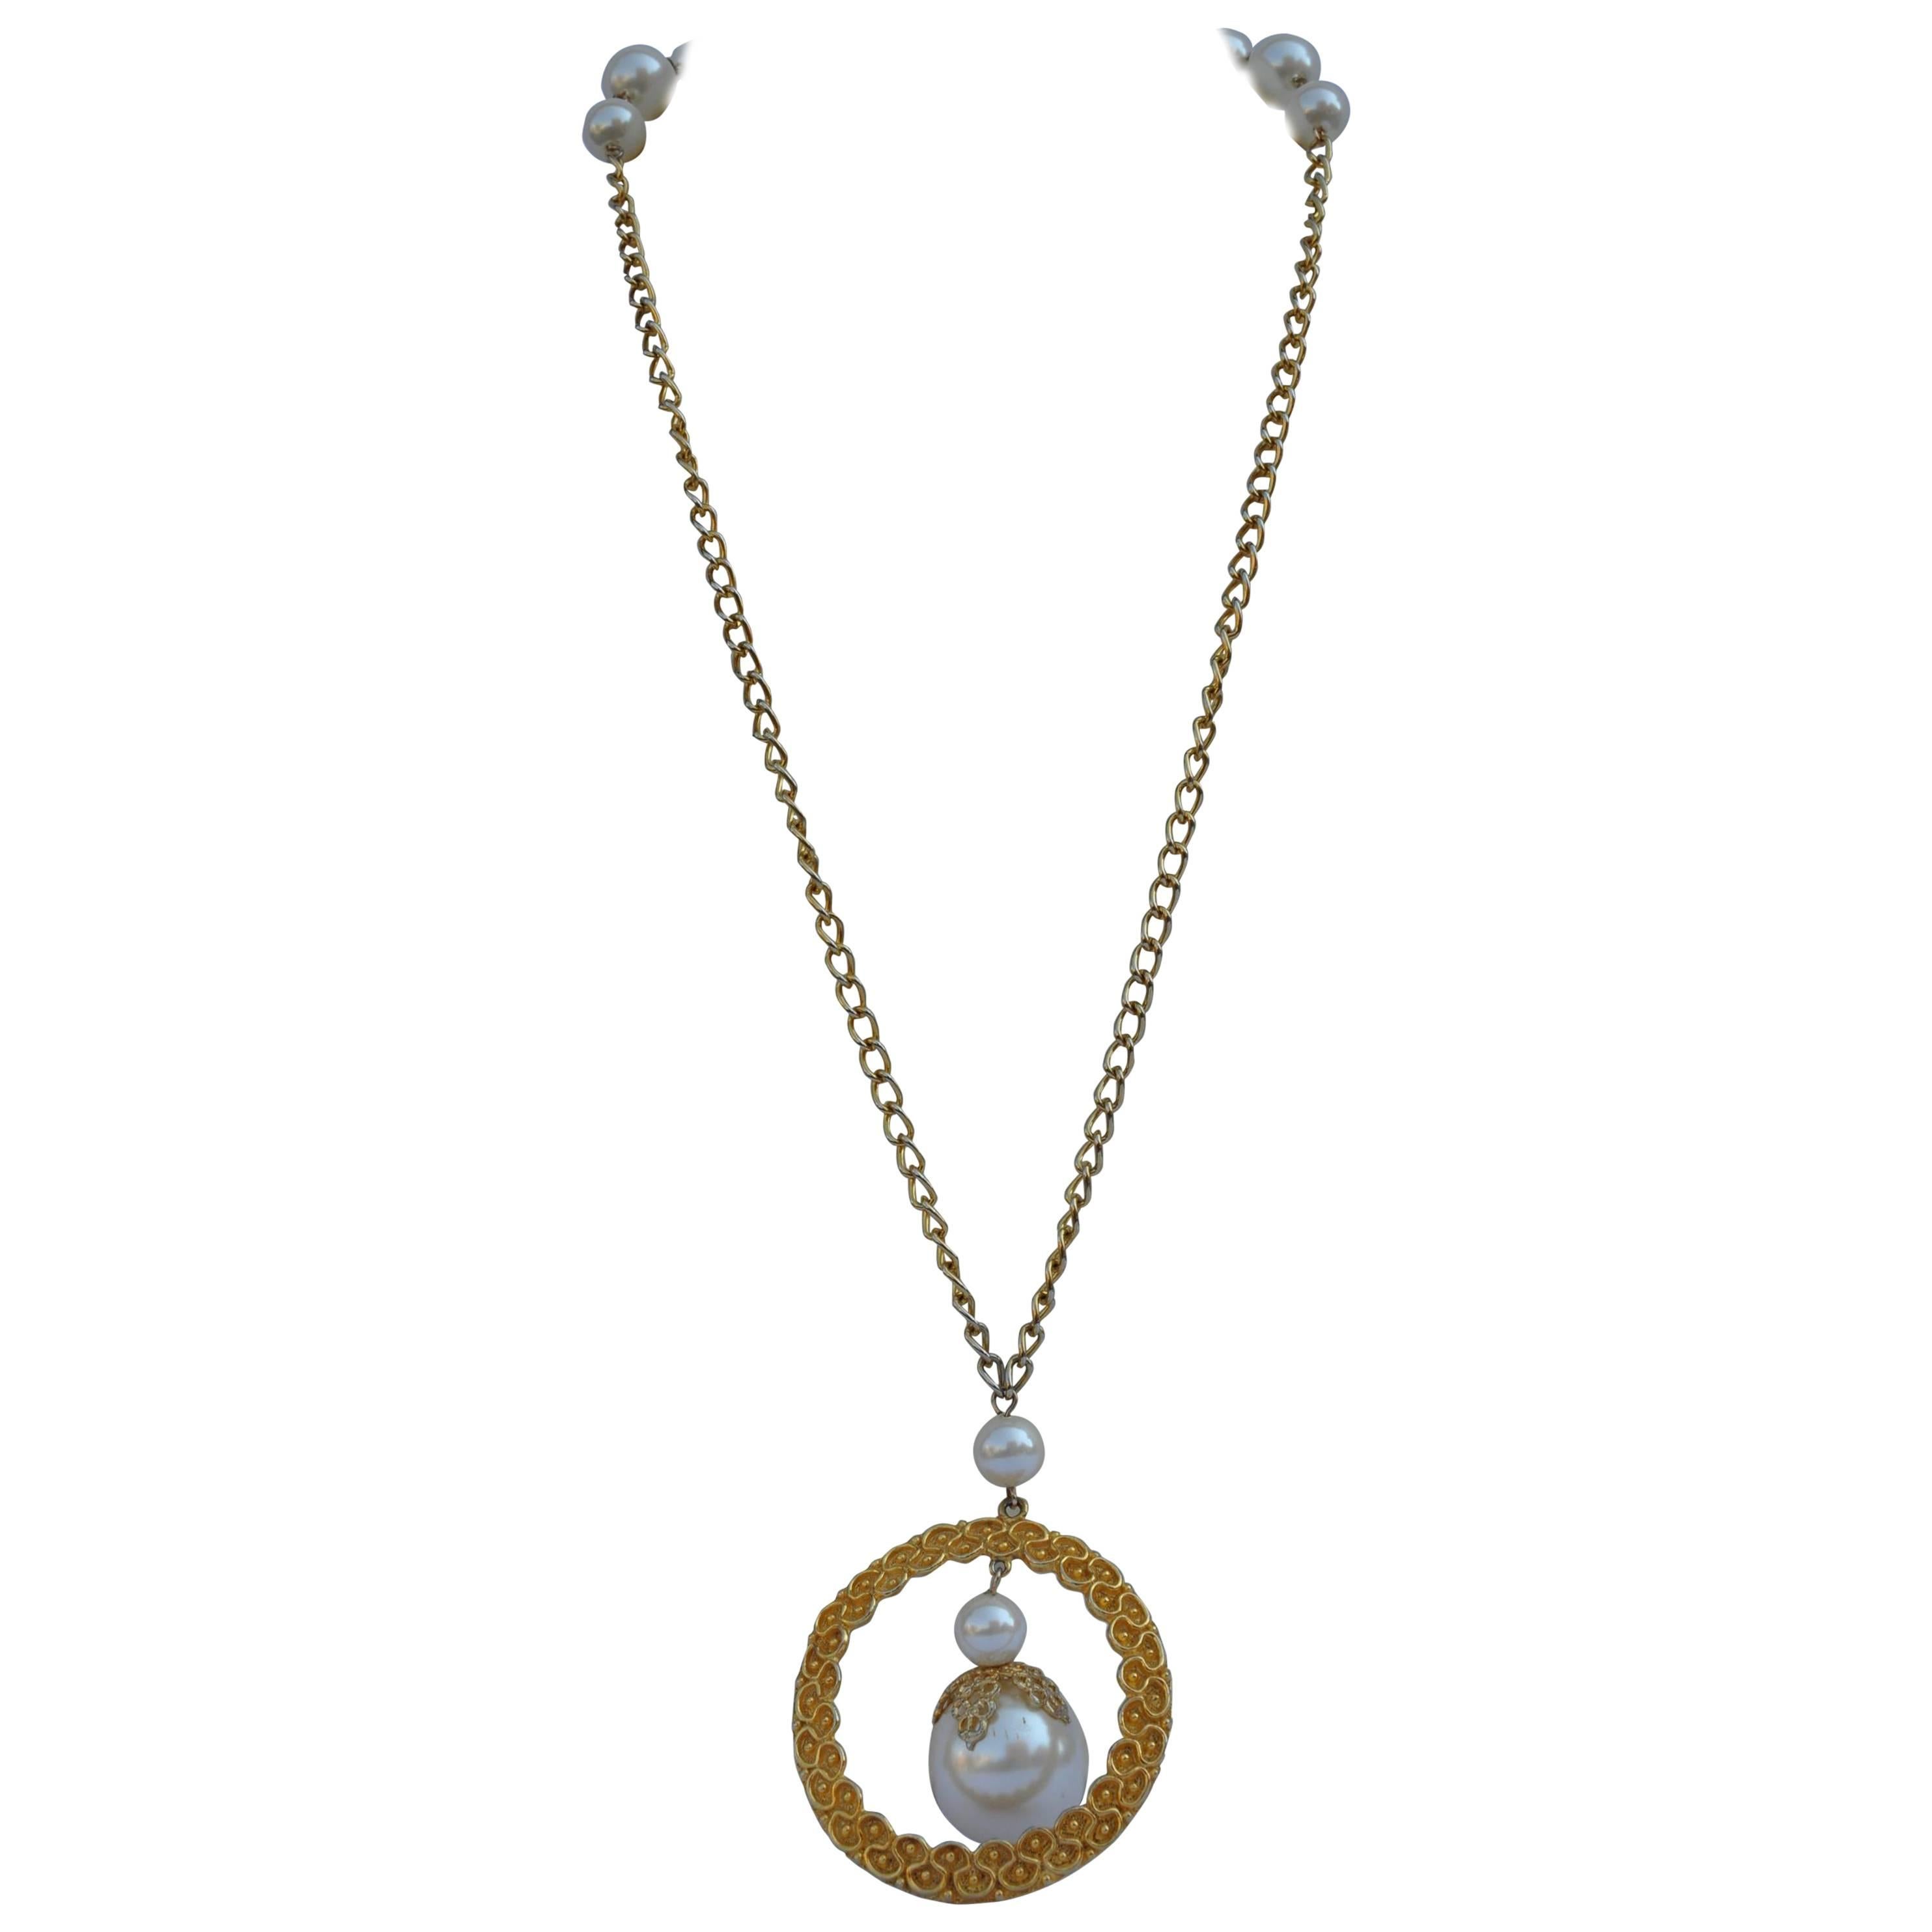 Large Circular Pendant with Large Center Pearl Necklace For Sale